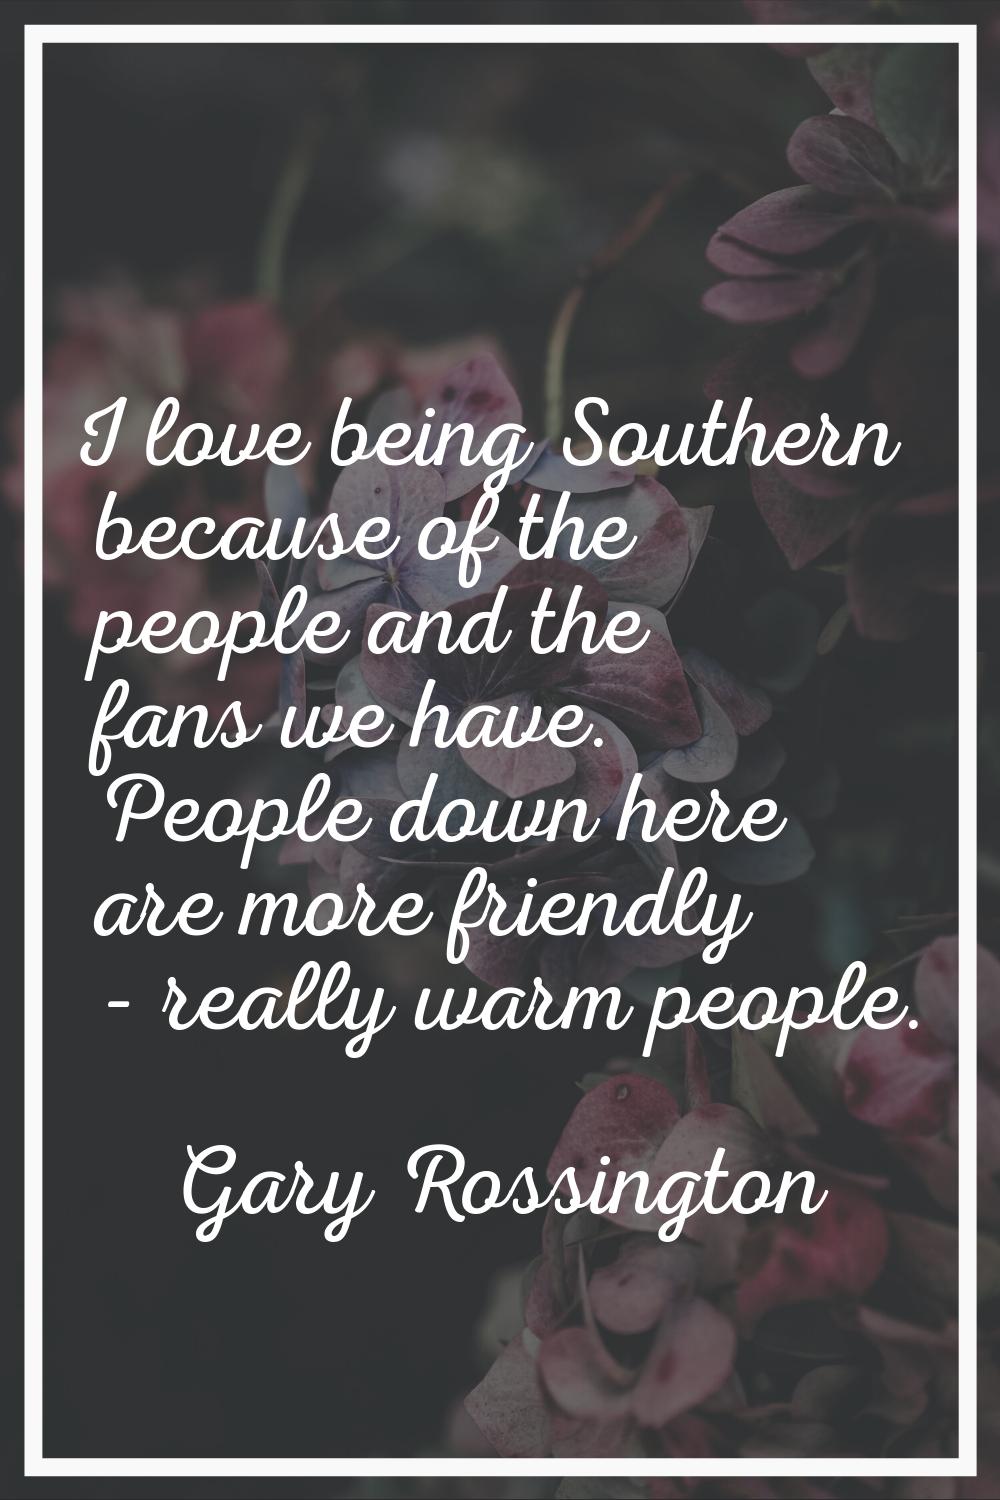 I love being Southern because of the people and the fans we have. People down here are more friendl